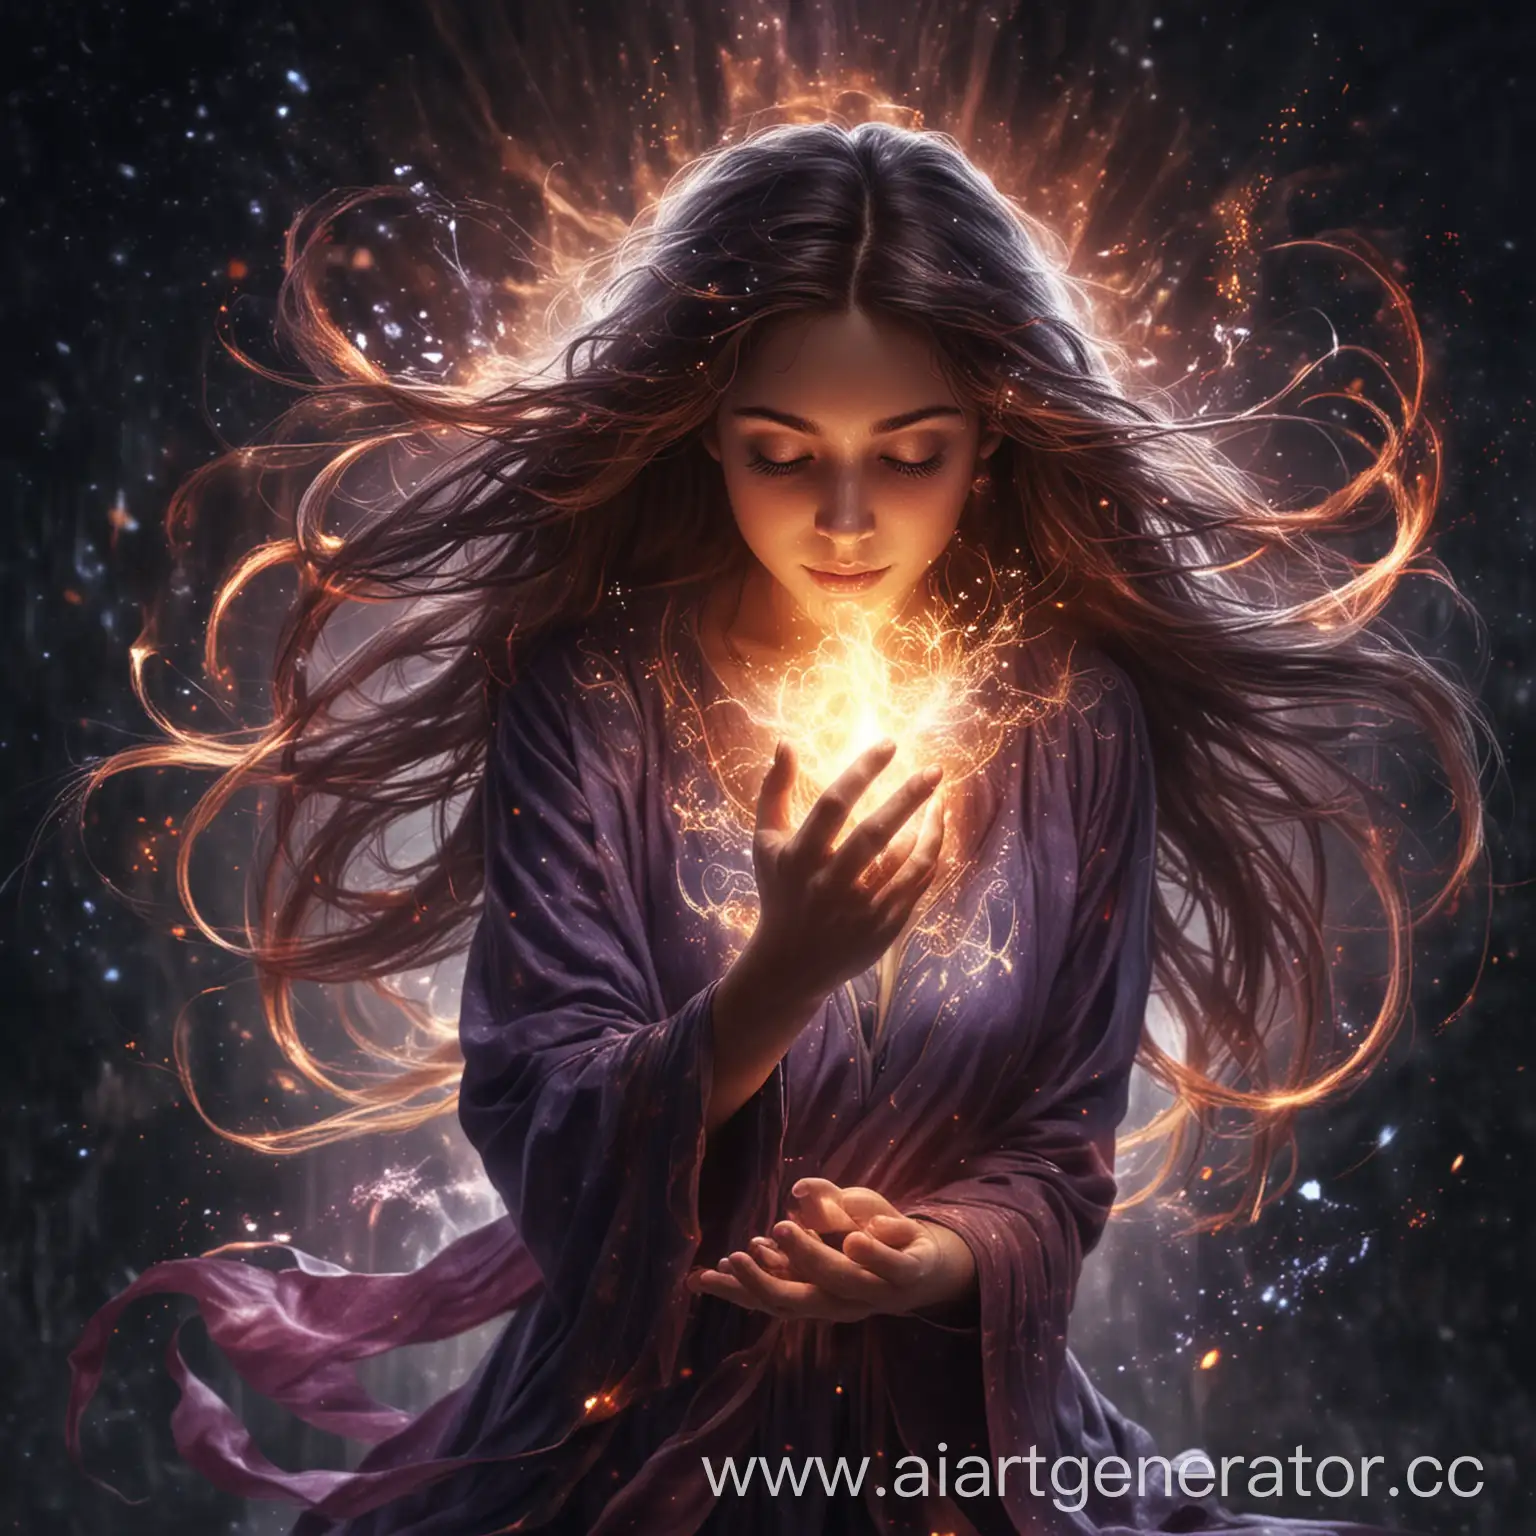 Soul-Infused-with-Magical-Power-Mystical-Fantasy-Art